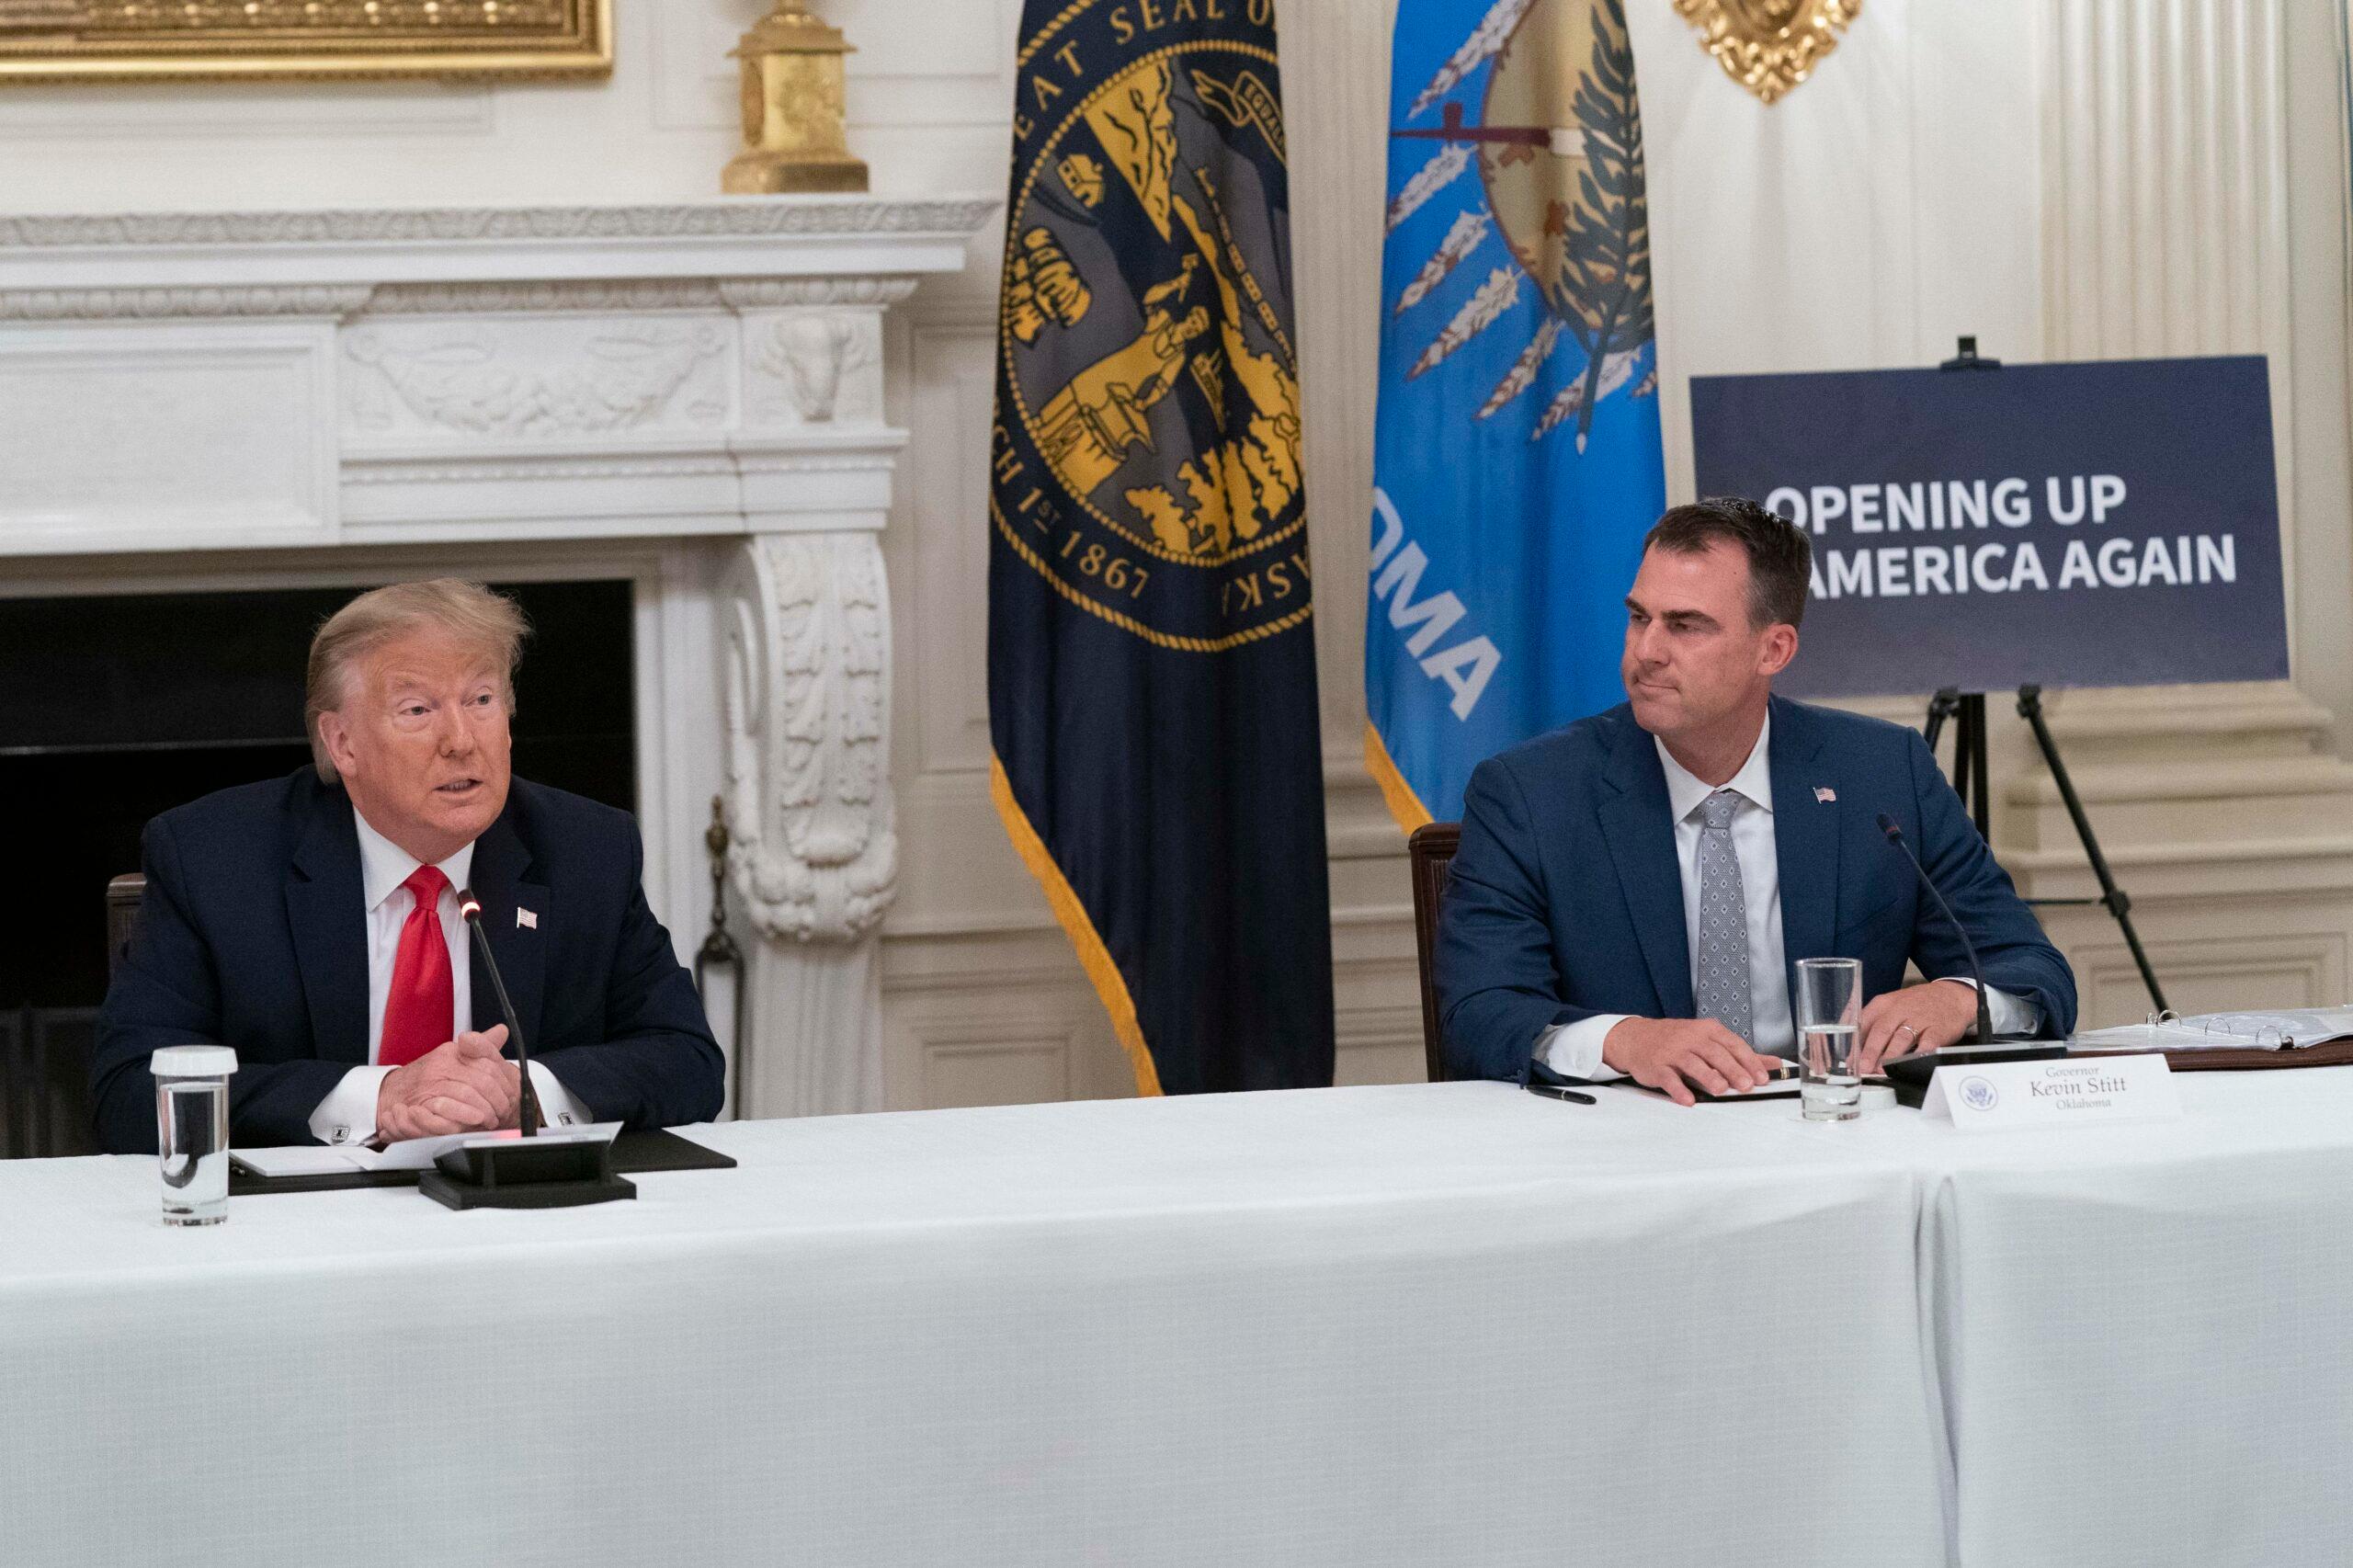 President Donald Trump participates in a roundtable with Governors on the reopening of America s small businesses